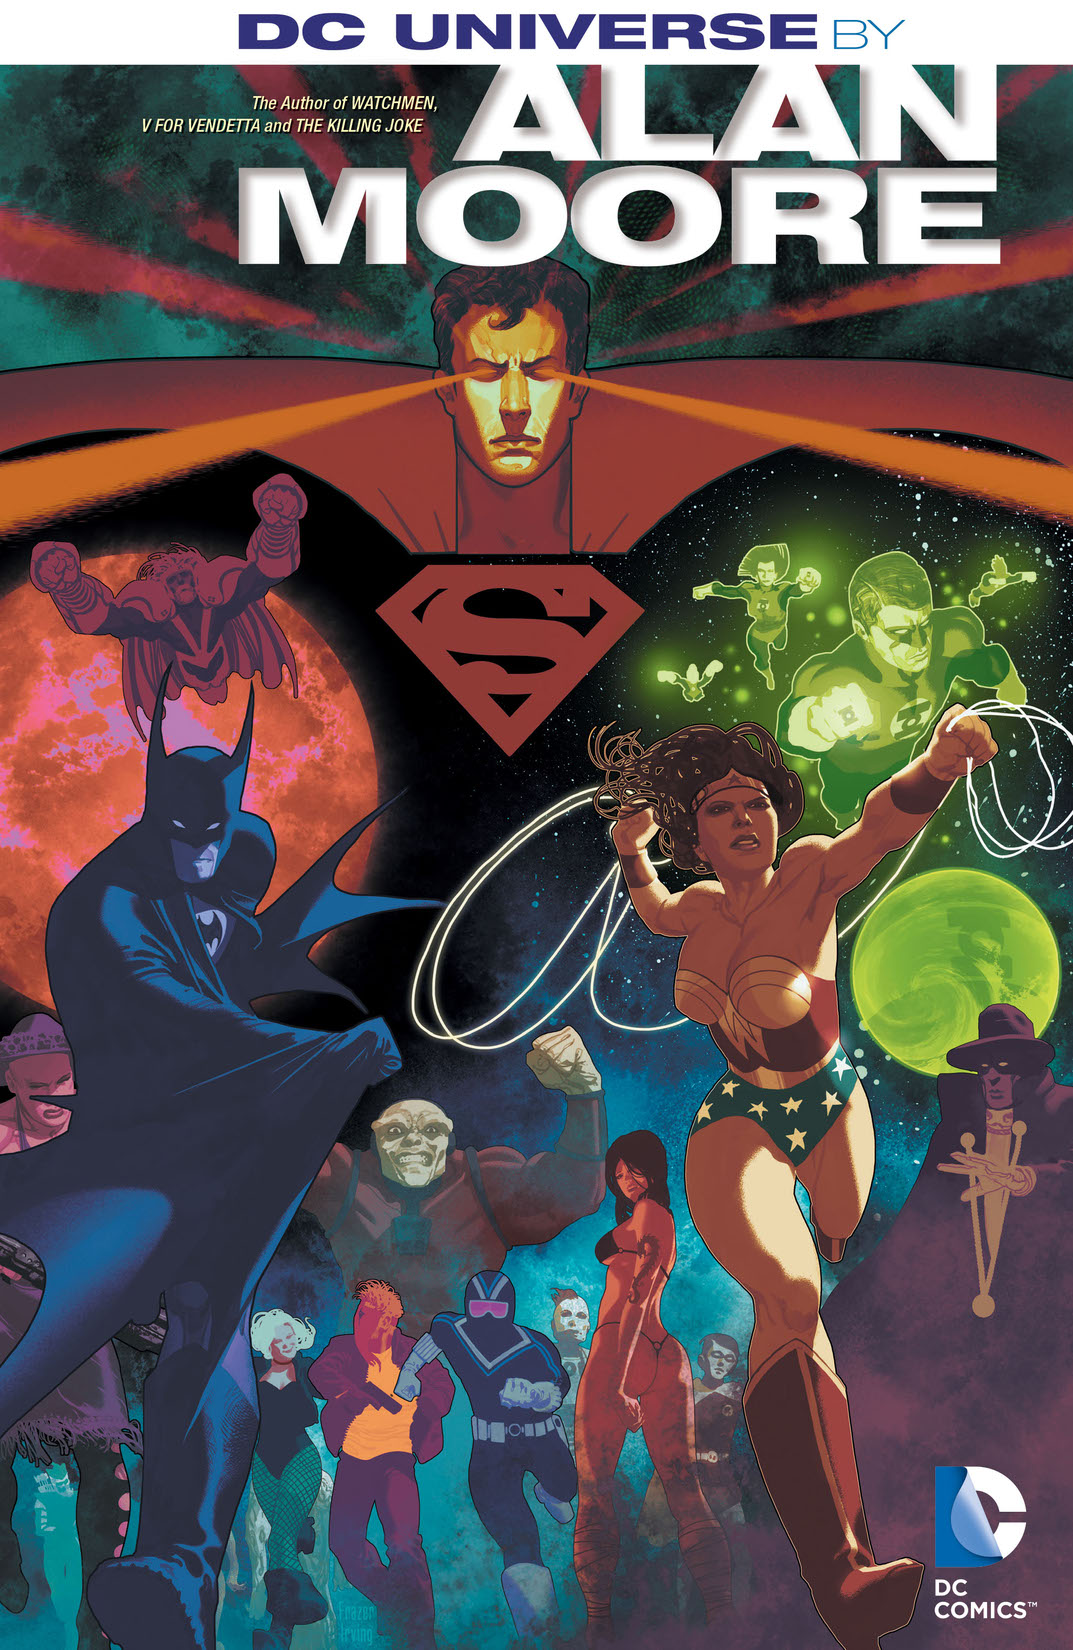 DC Universe by Alan Moore preview images